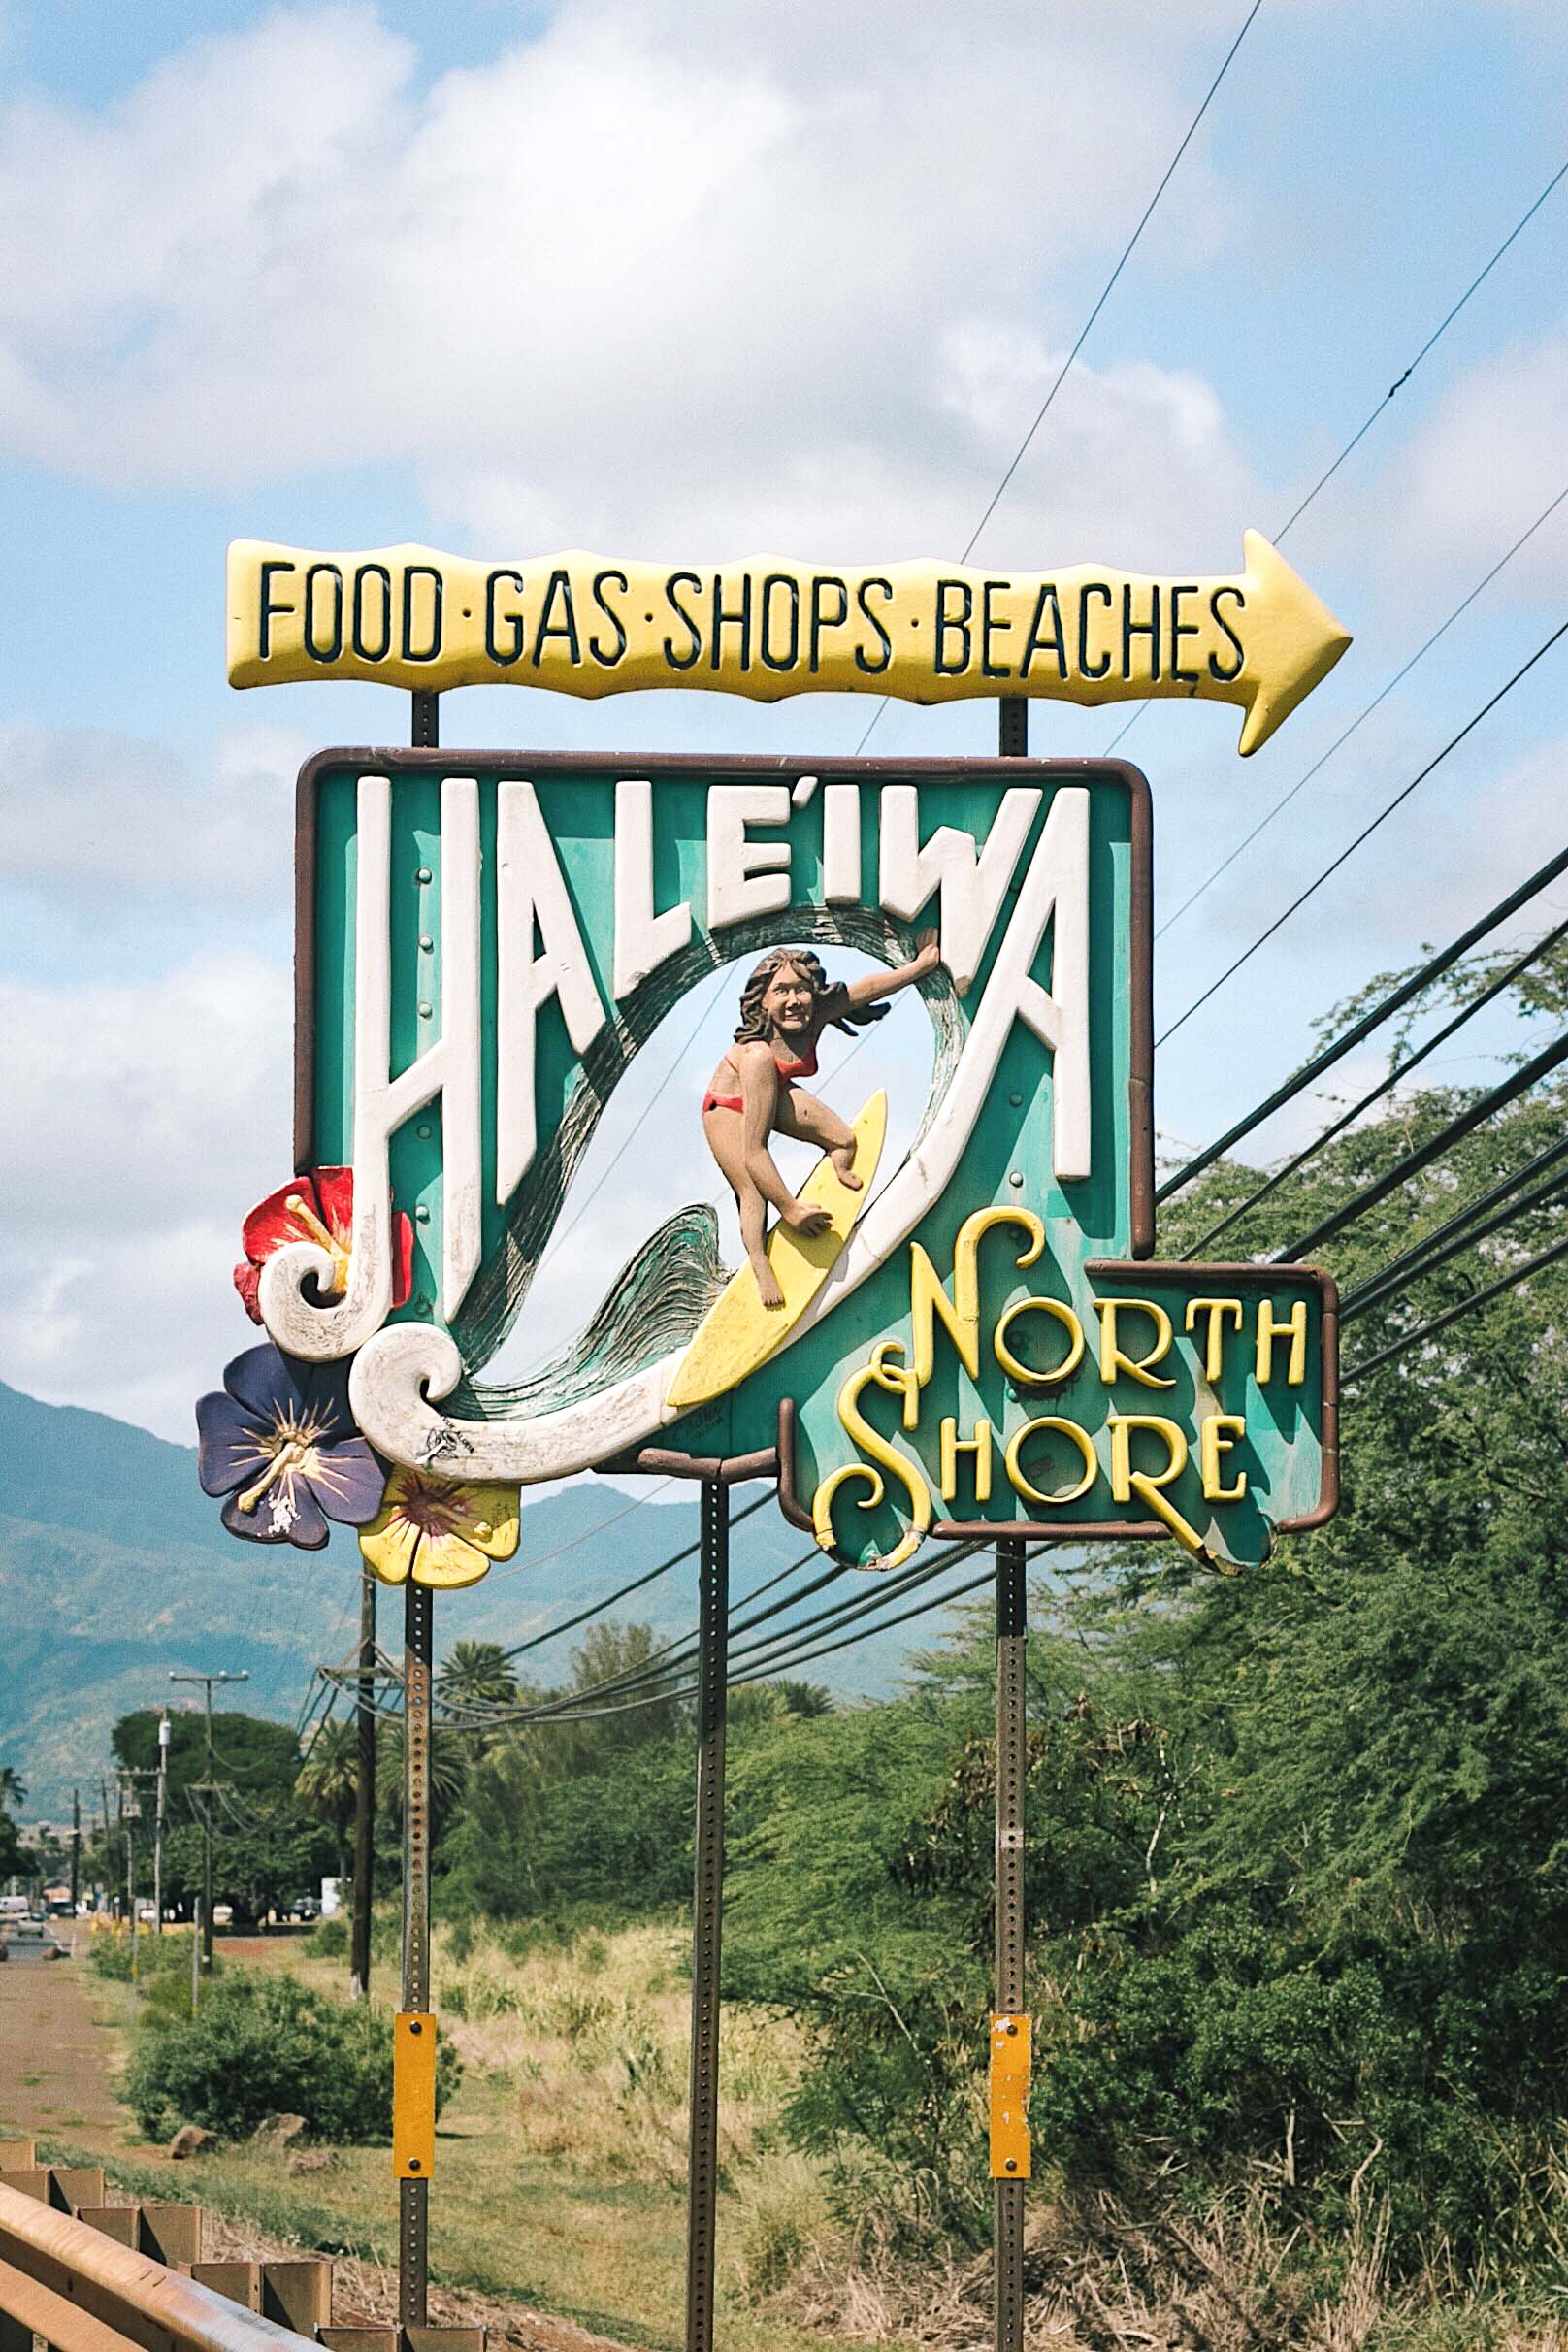 Haleiwa on the North Shore of Oahu is a place you should not miss while visiting